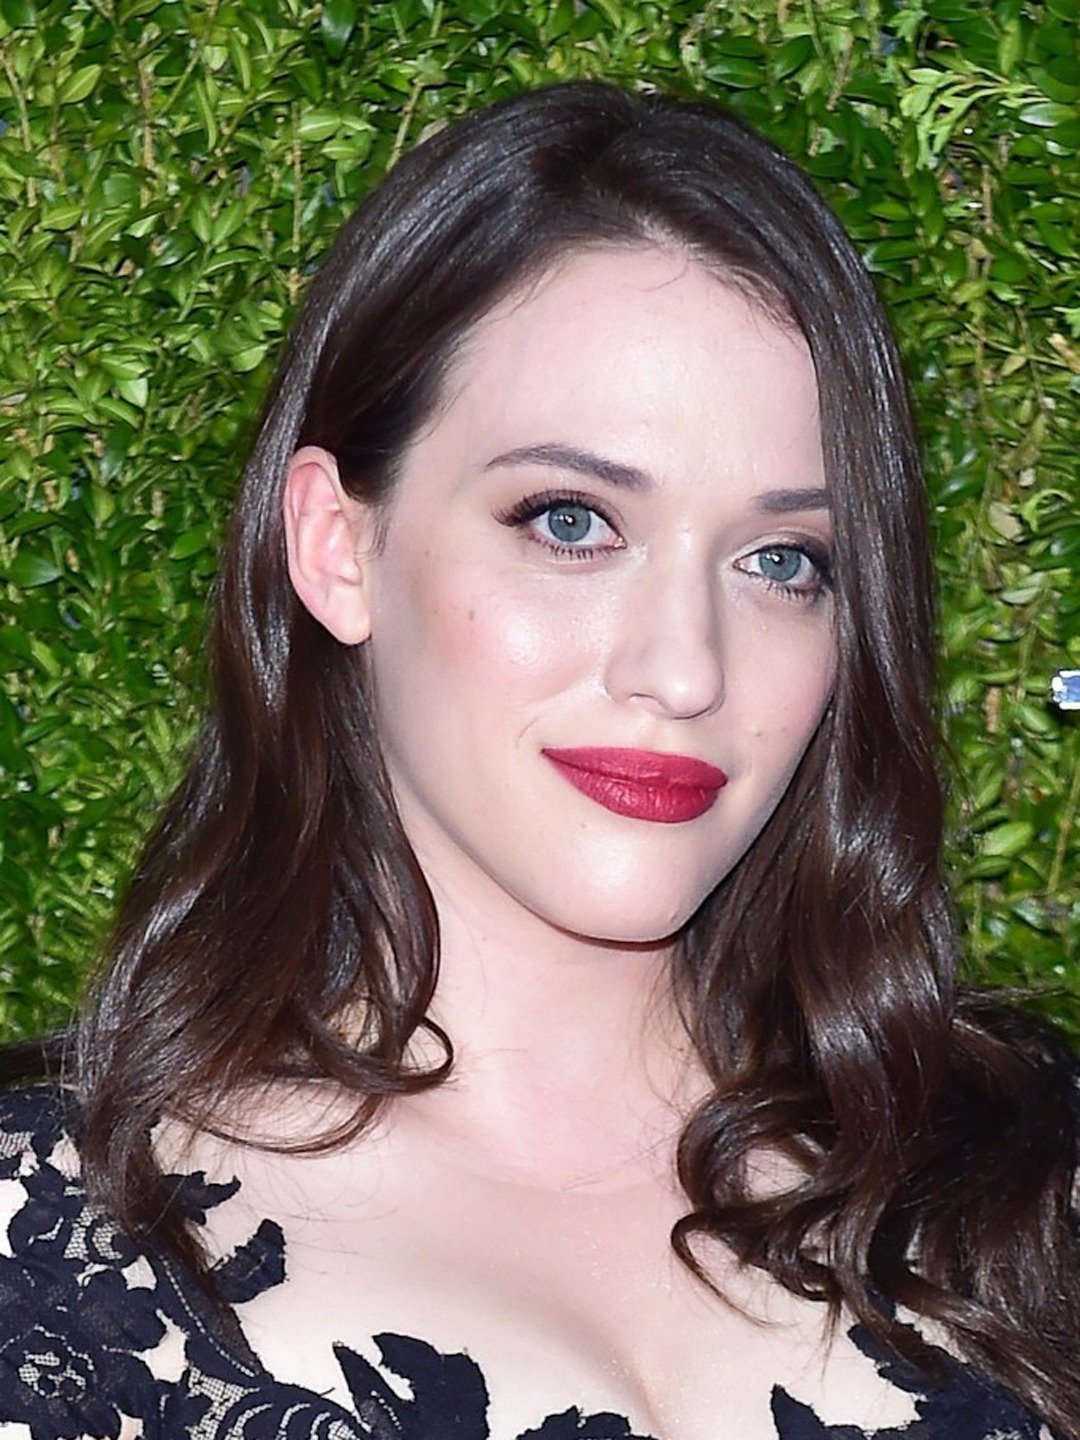 How tall is Kat Dennings?